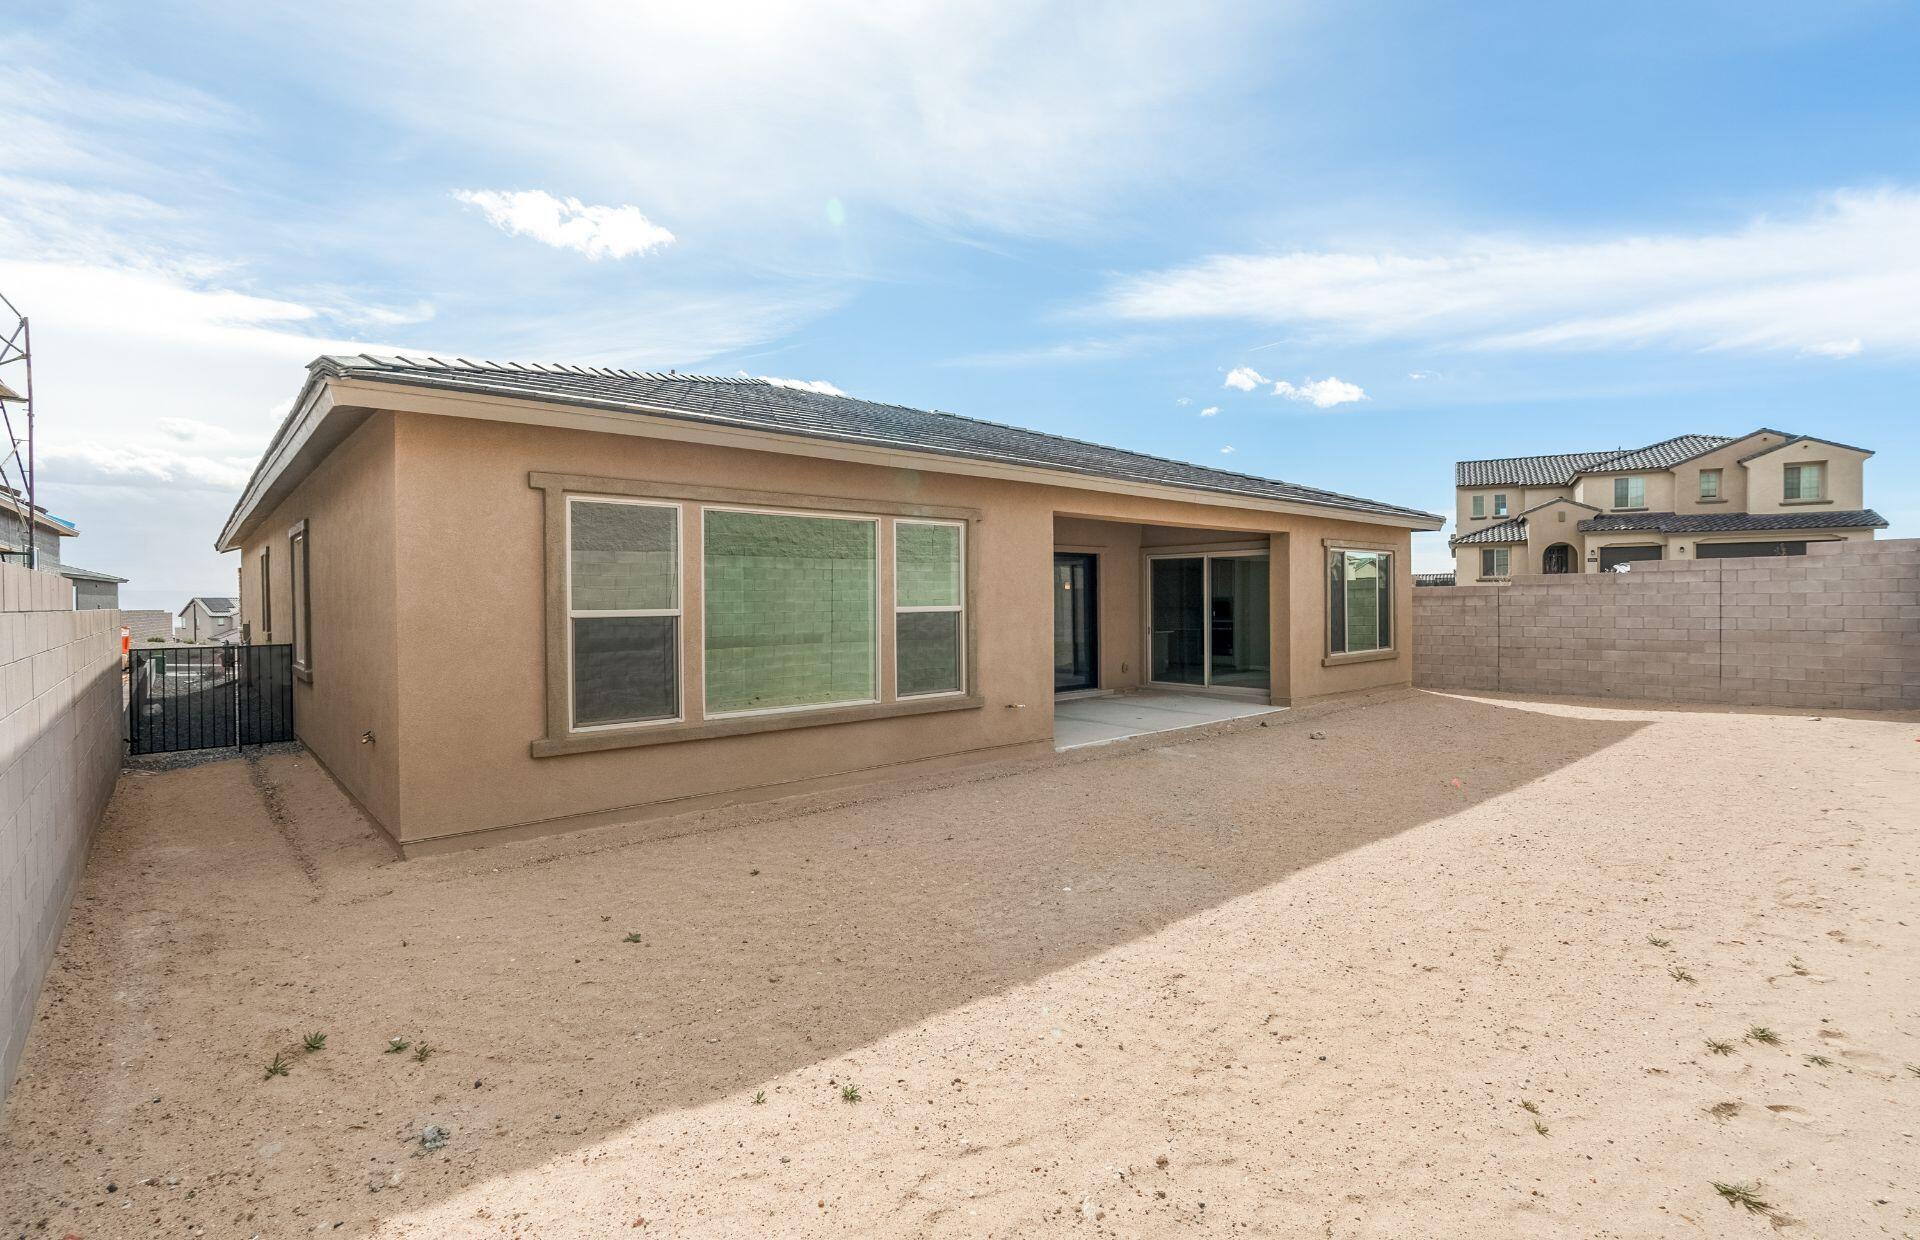 1701 Mount Hood Trail NW, Albuquerque, New Mexico 87120, 4 Bedrooms Bedrooms, ,3 BathroomsBathrooms,Residential,For Sale,1701 Mount Hood Trail NW,1059850